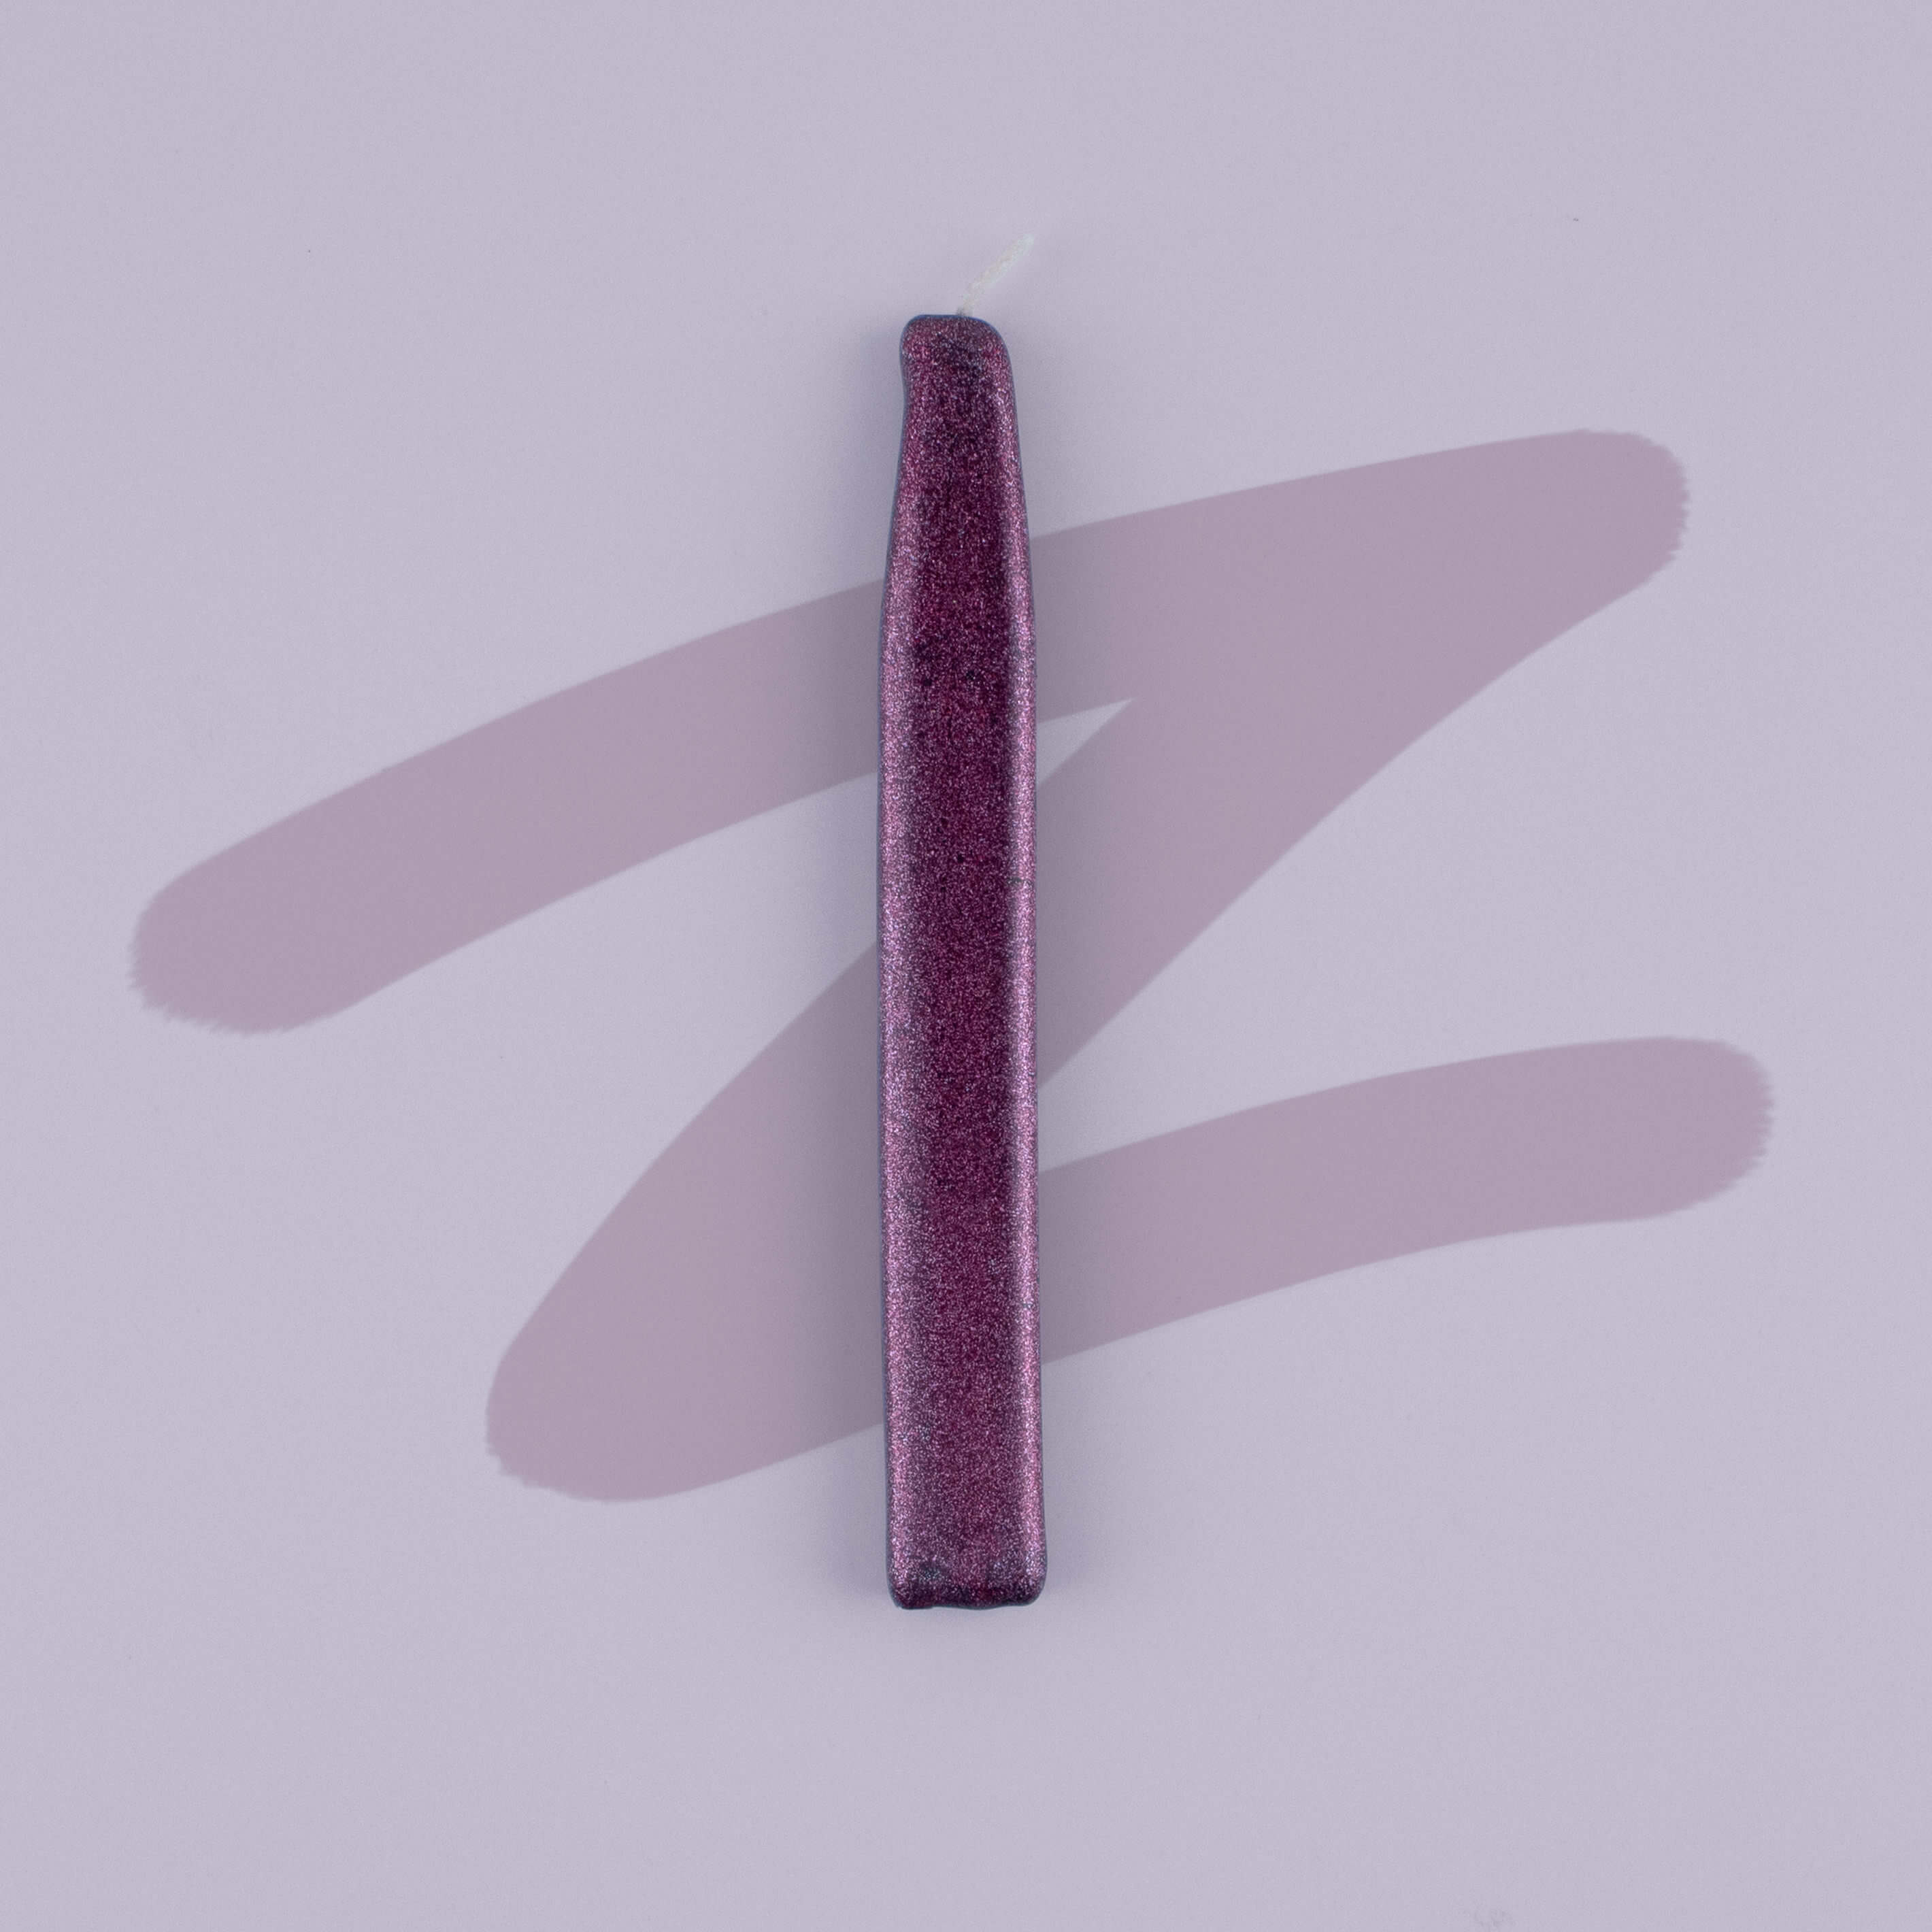 Traditional Sealing Wax with Wick - Sparkling Boysenberry - Kustom Haus